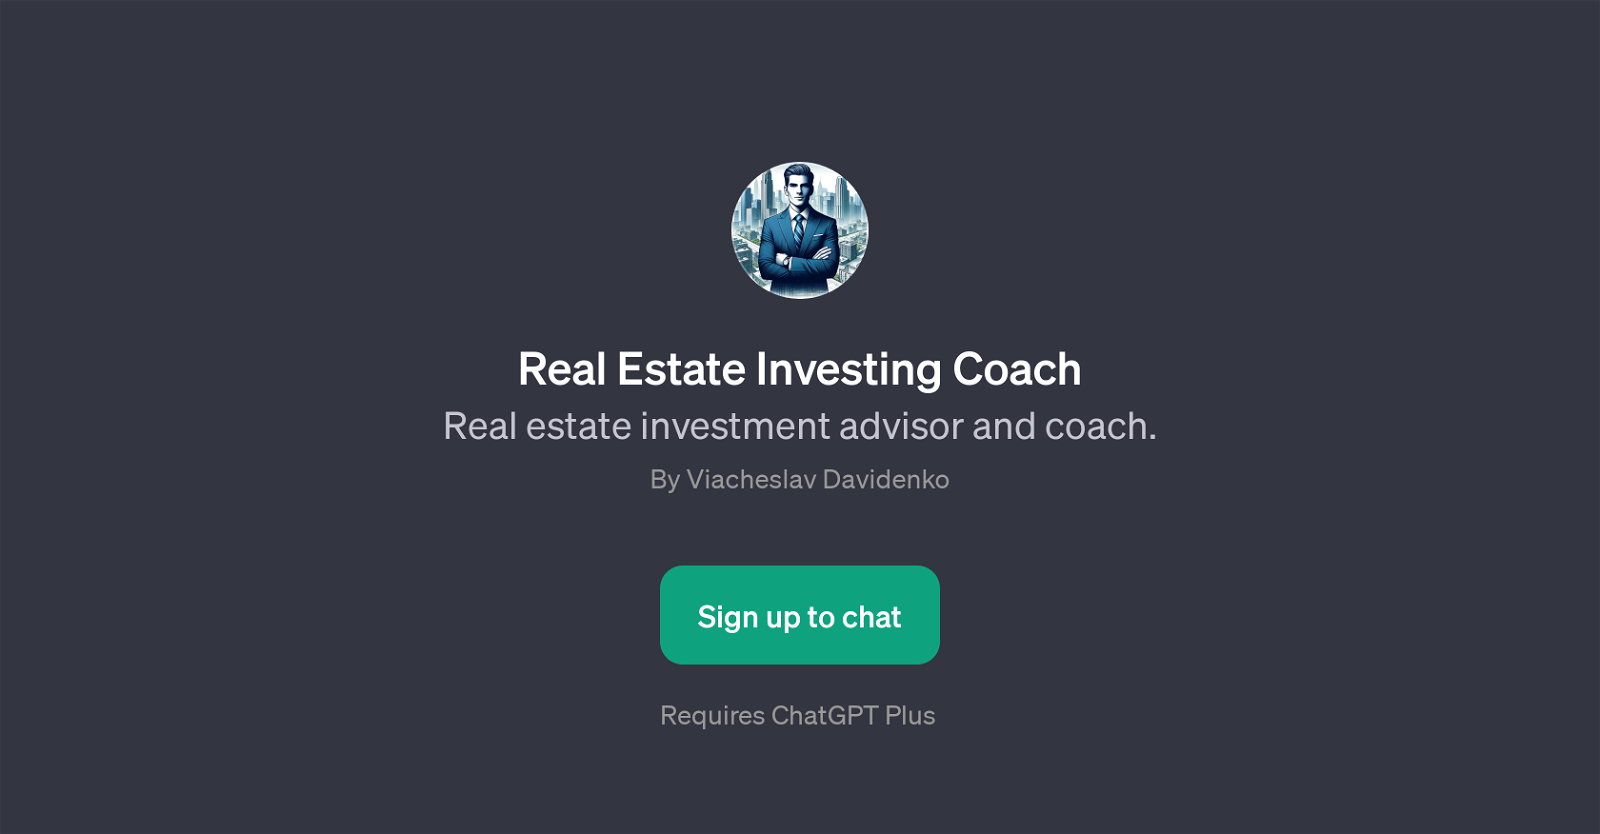 Real Estate Investing Coach website